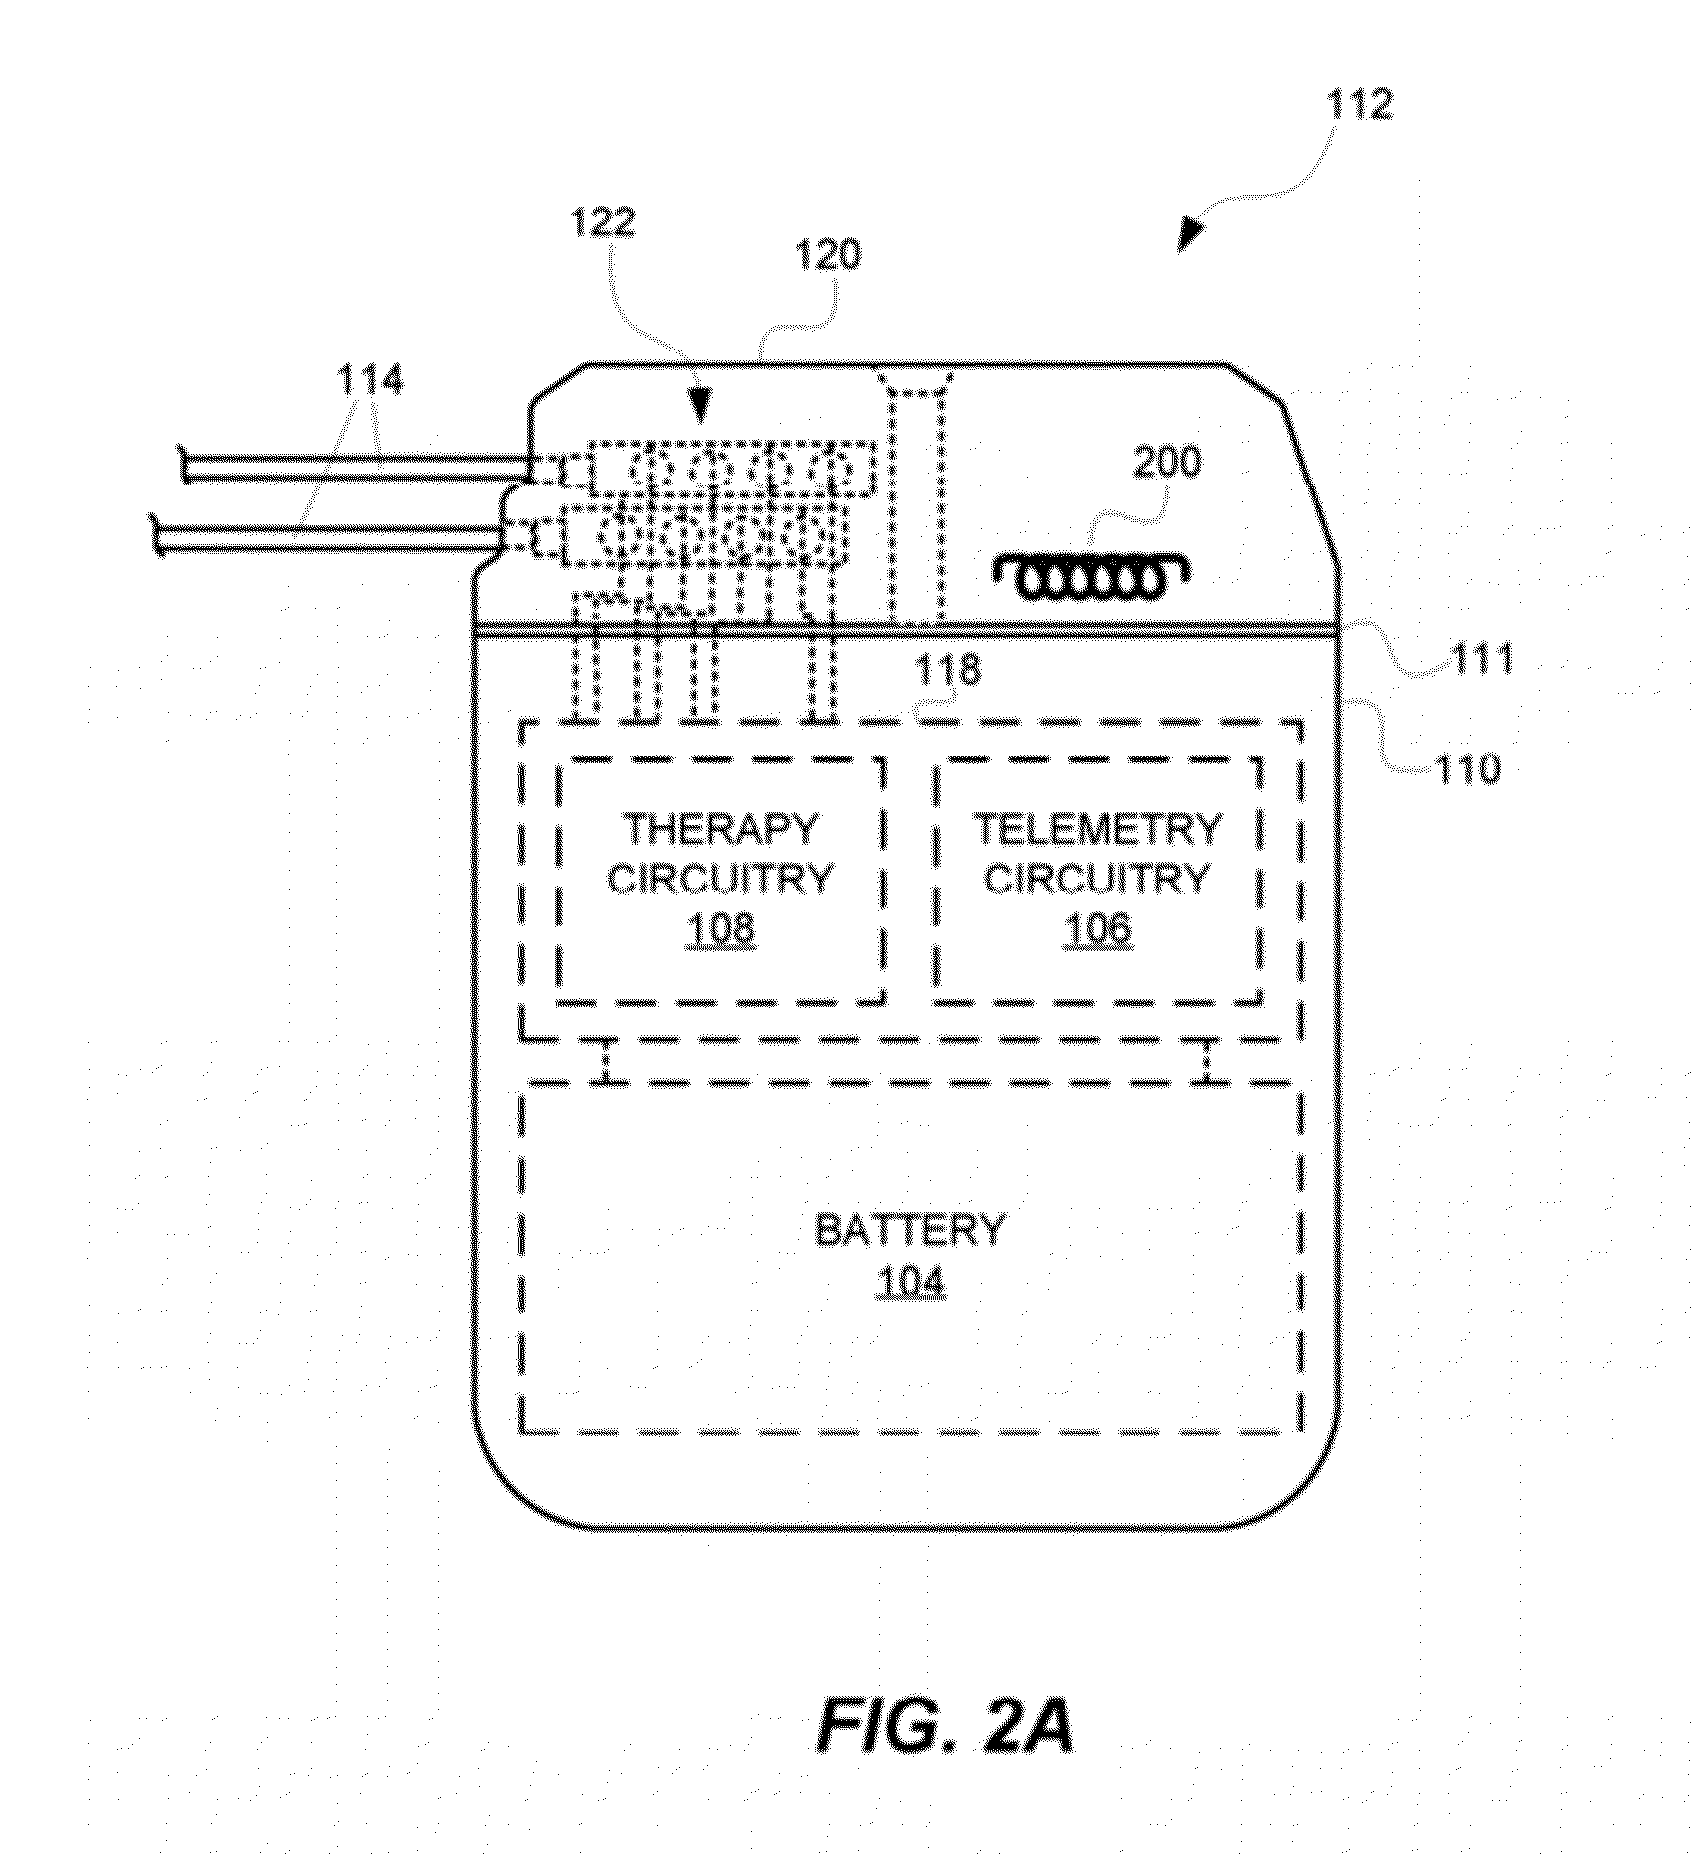 Telemetry antennas for medical devices and medical devices including telemetry antennas